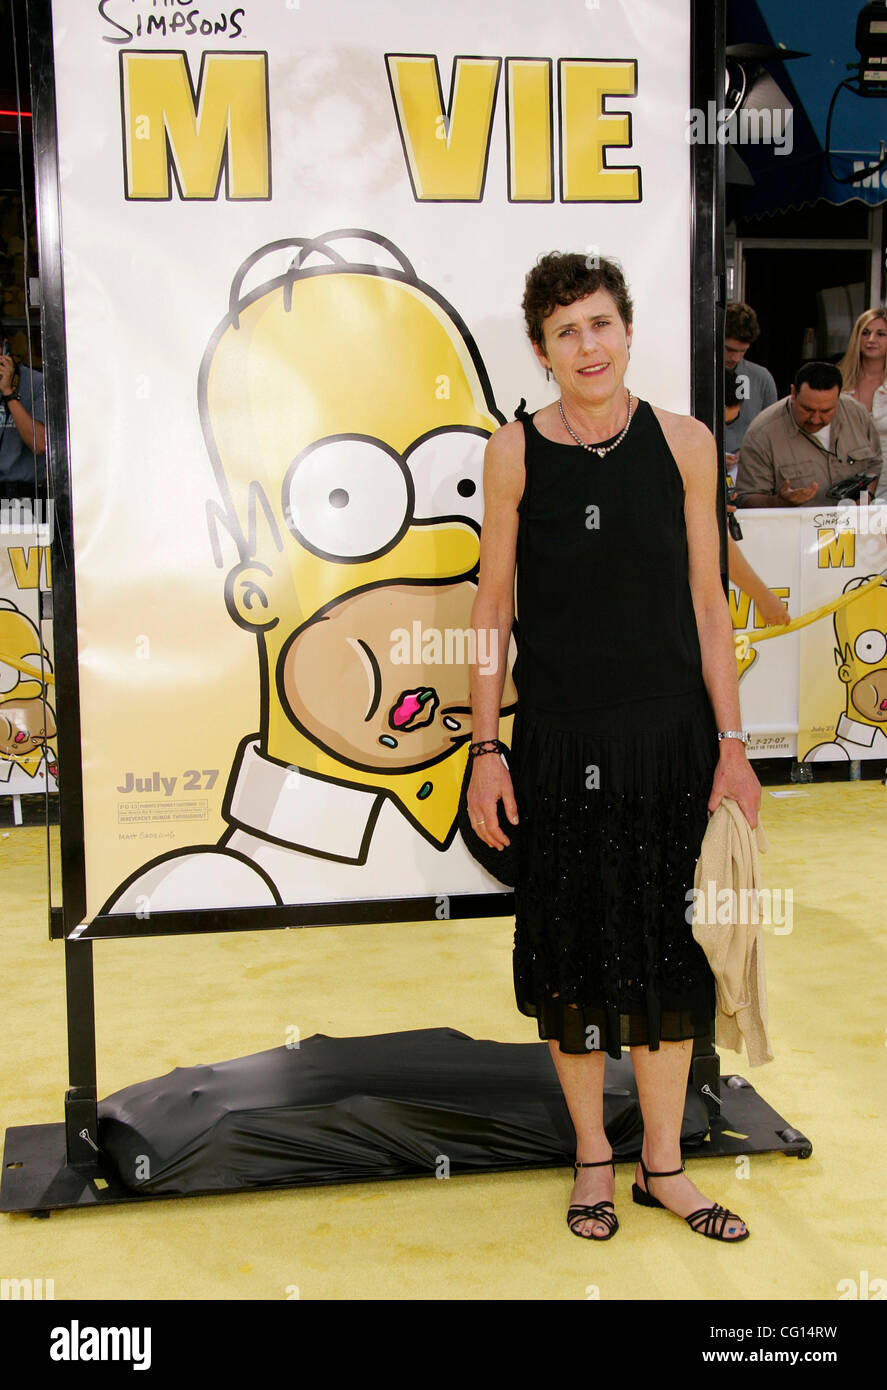 Jul 24, 2007 - Westwood, California, USA - Actress JULIE KAVNER at 'The Simpsons Movie' held at the Mann Village Theater. (Credit Image: © Lisa O'Connor/ZUMA Press) Stock Photo